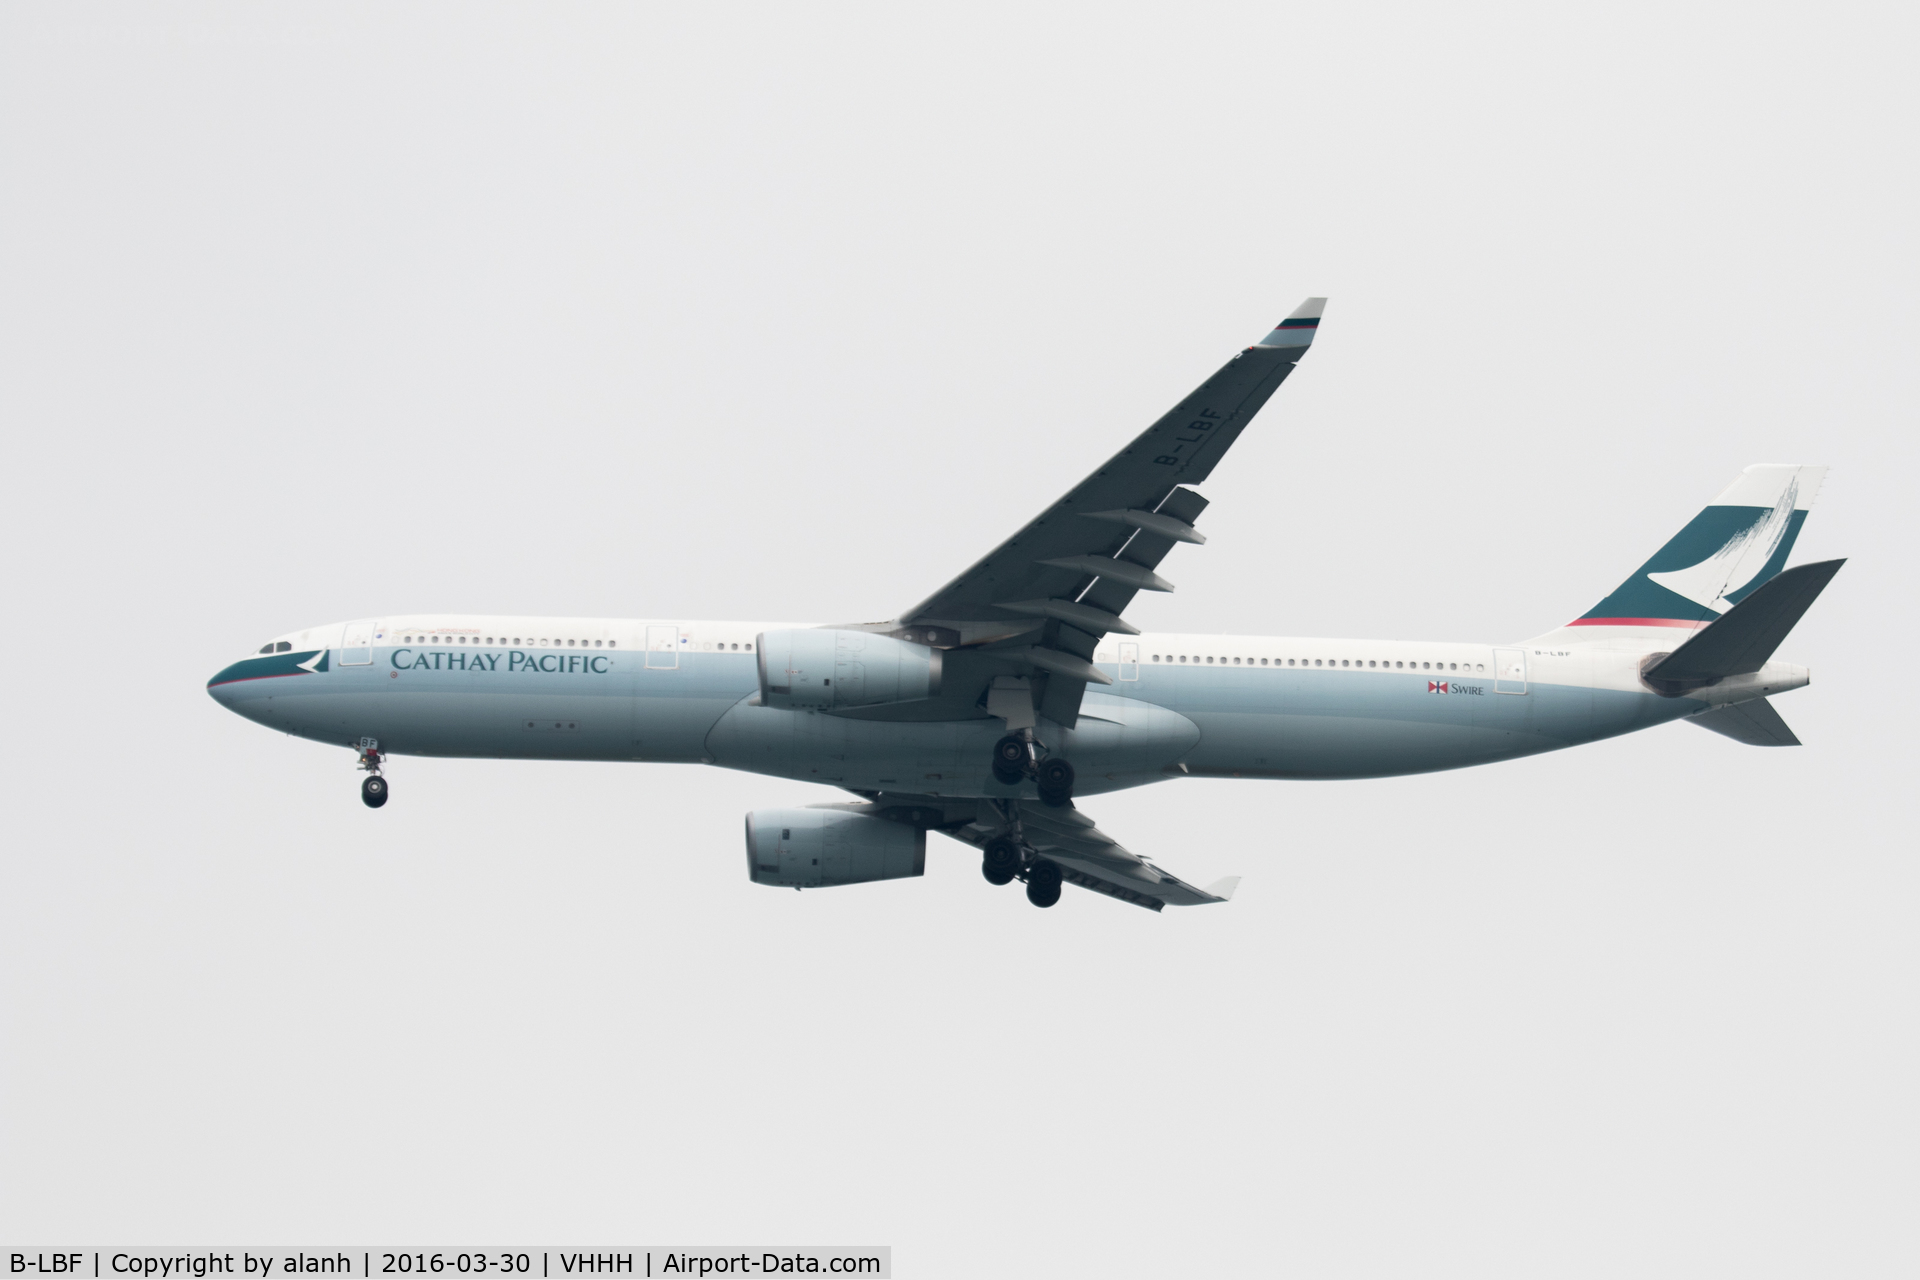 B-LBF, 2014 Airbus A330-343 C/N 1545, On finals for Hong Kong, inbound from Bangkok